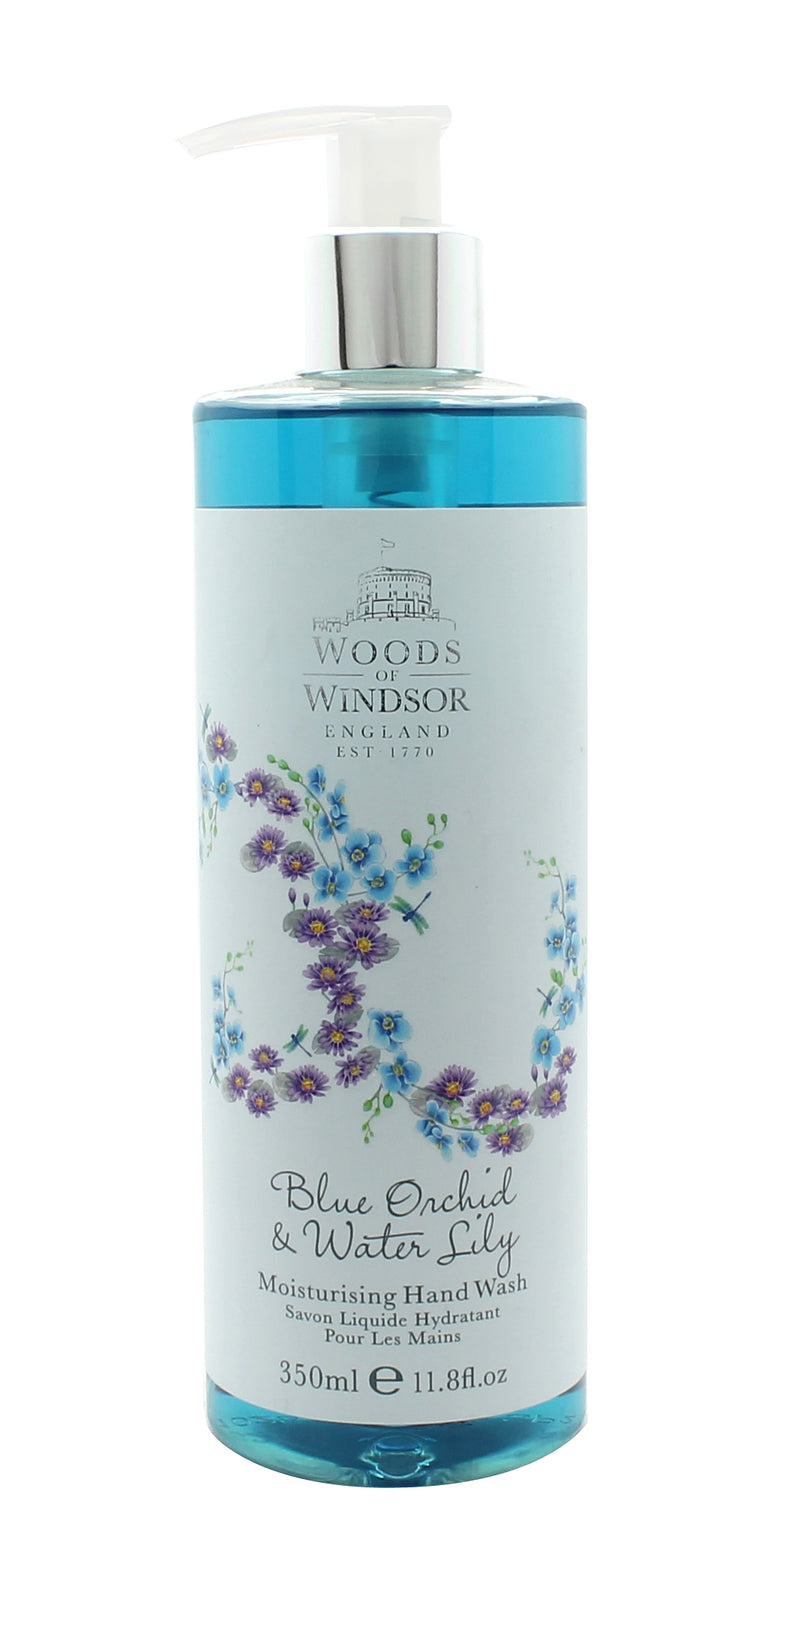 Woods of Windsor Blue Orchid & Water Lily Handtvål 350ml